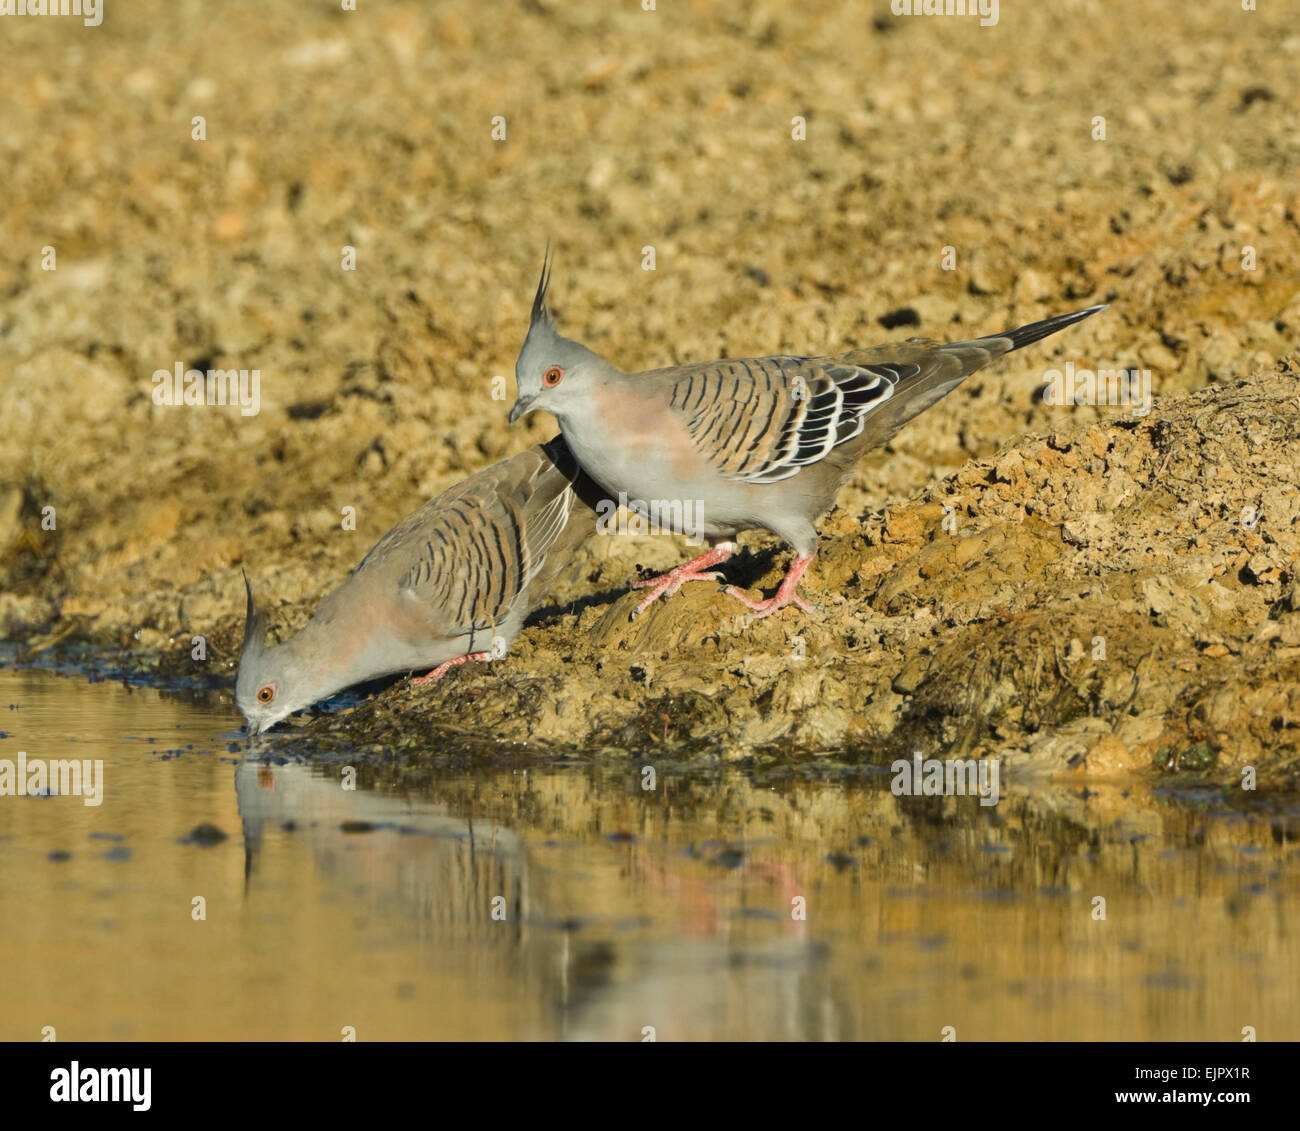 Crested Pigeons (Ocyphaps lophotes) drinking from a pool at daybreak, Mungo National Park, New South Wales, Australia Stock Photo